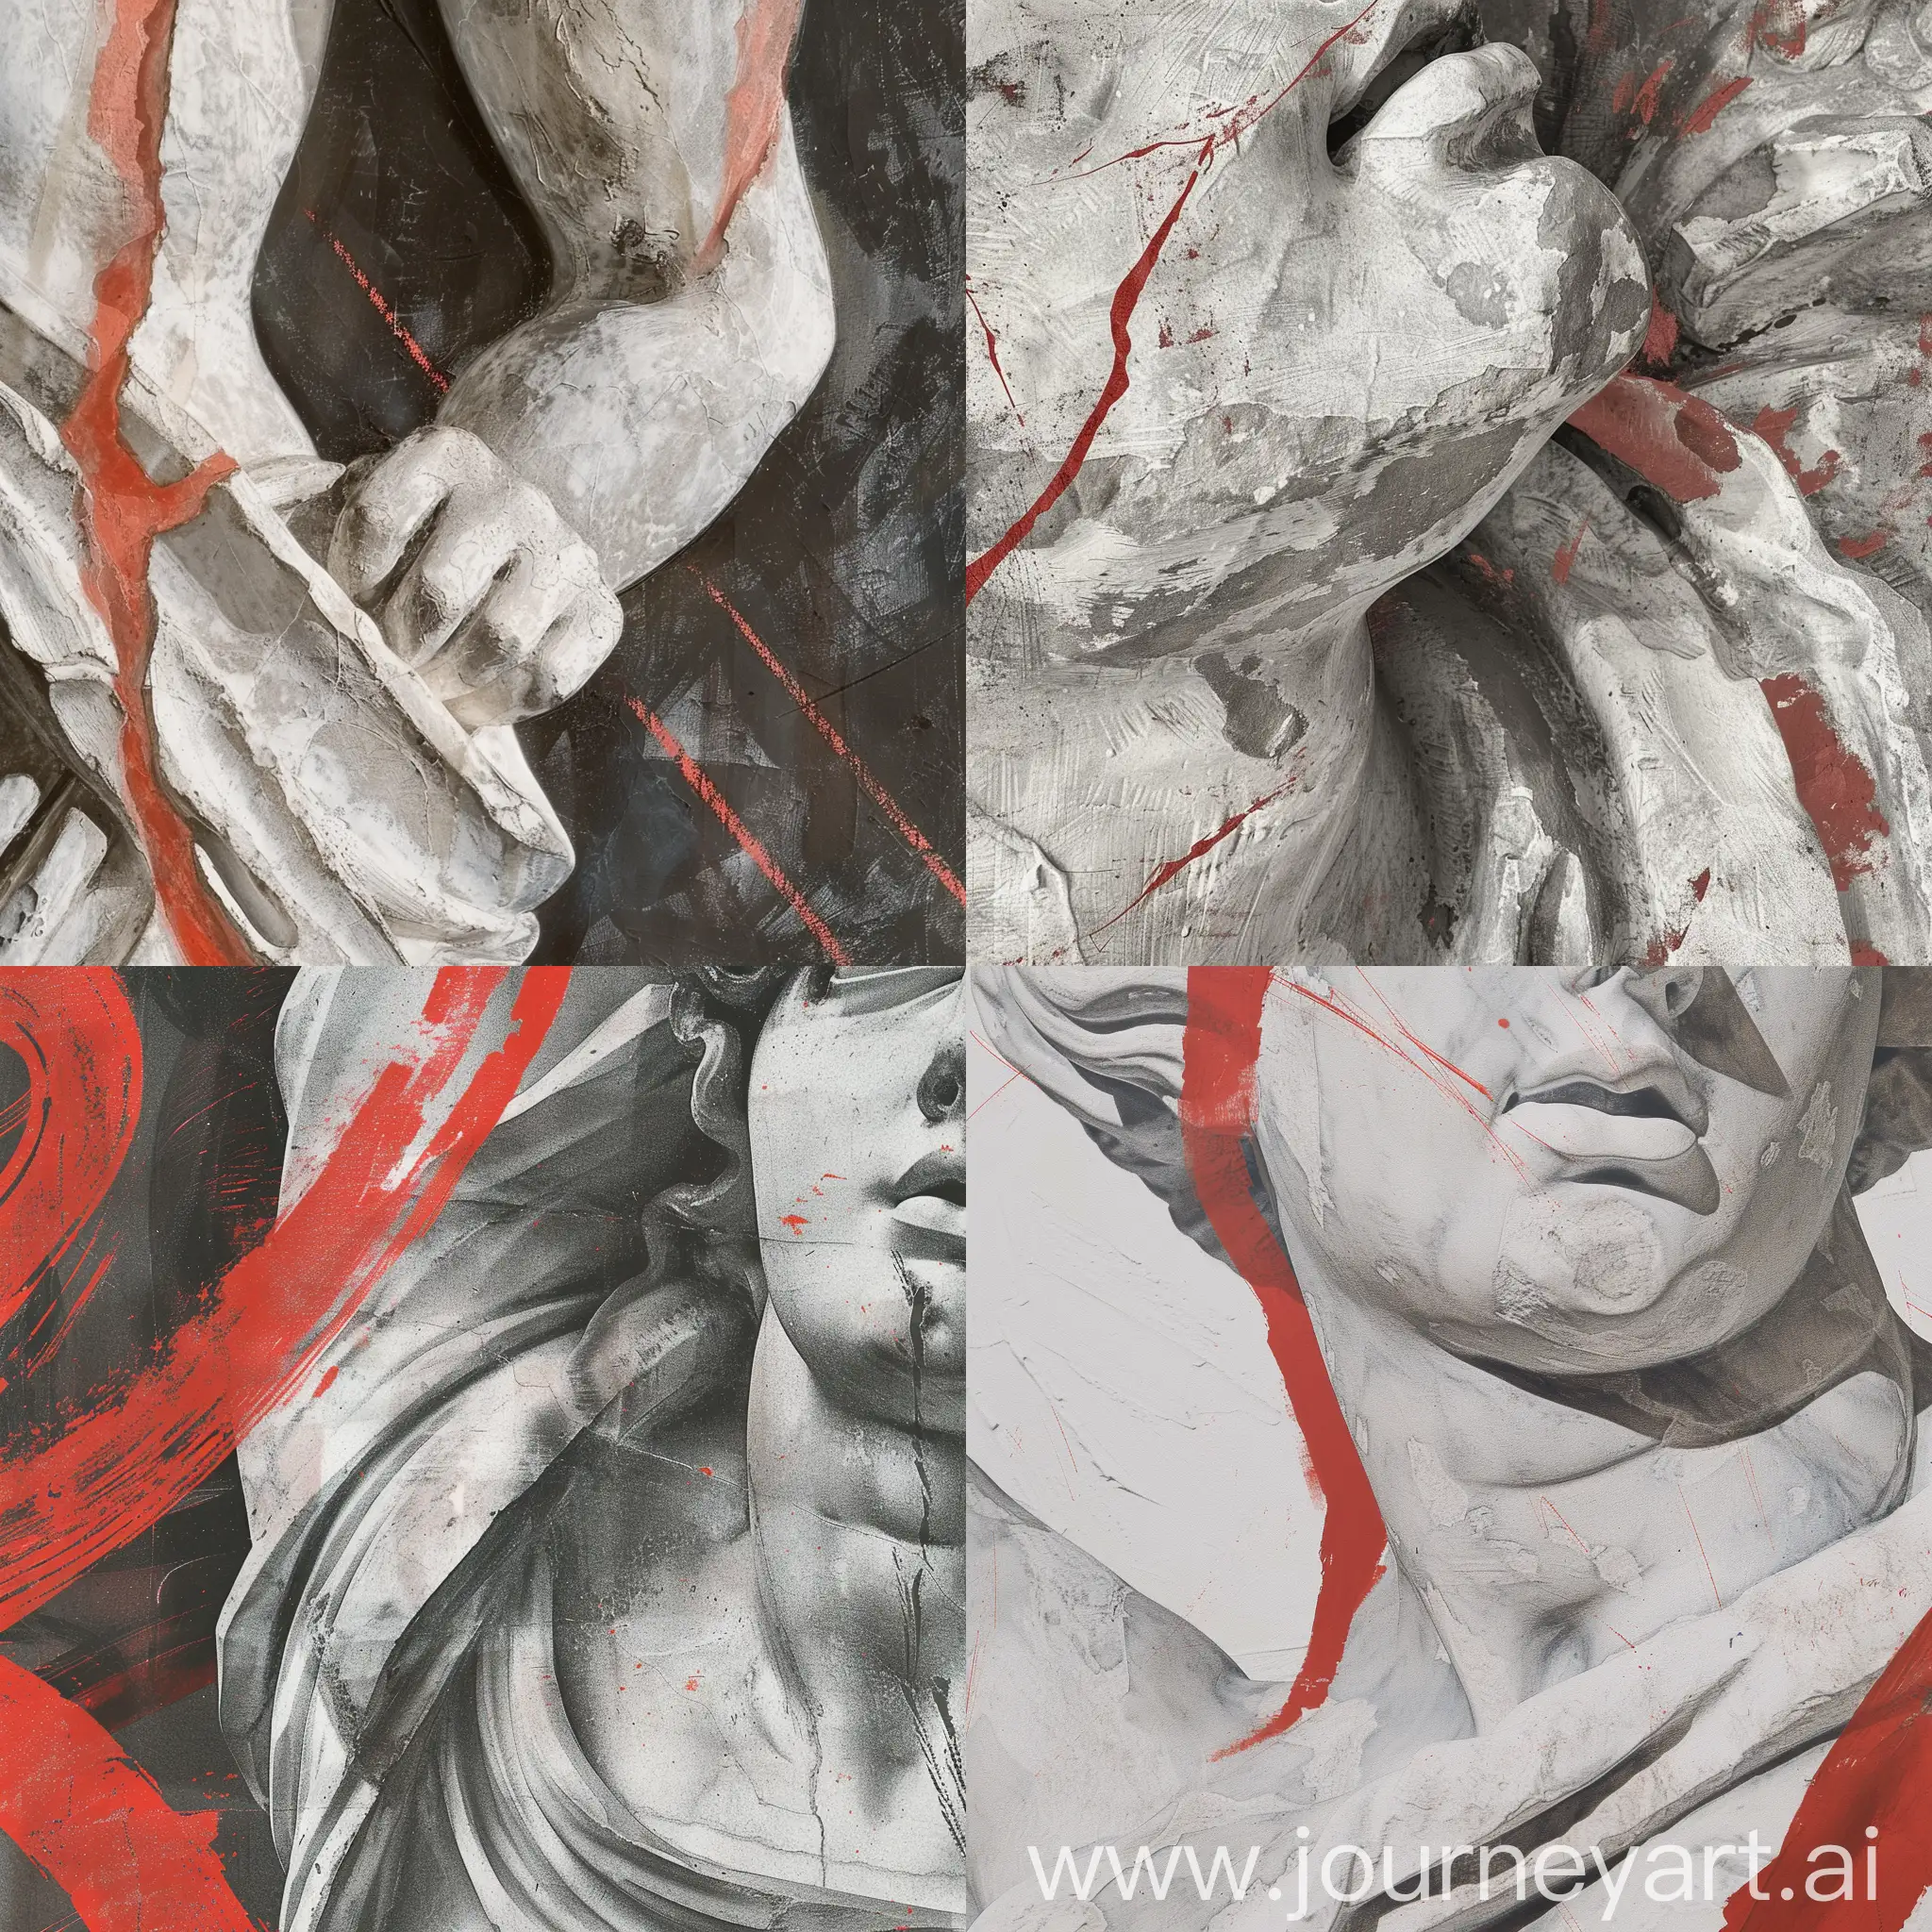 Renaissance-Stone-Sculpture-of-Female-Torso-CloseUp-in-Tempera-Style-with-Bold-Red-Accents